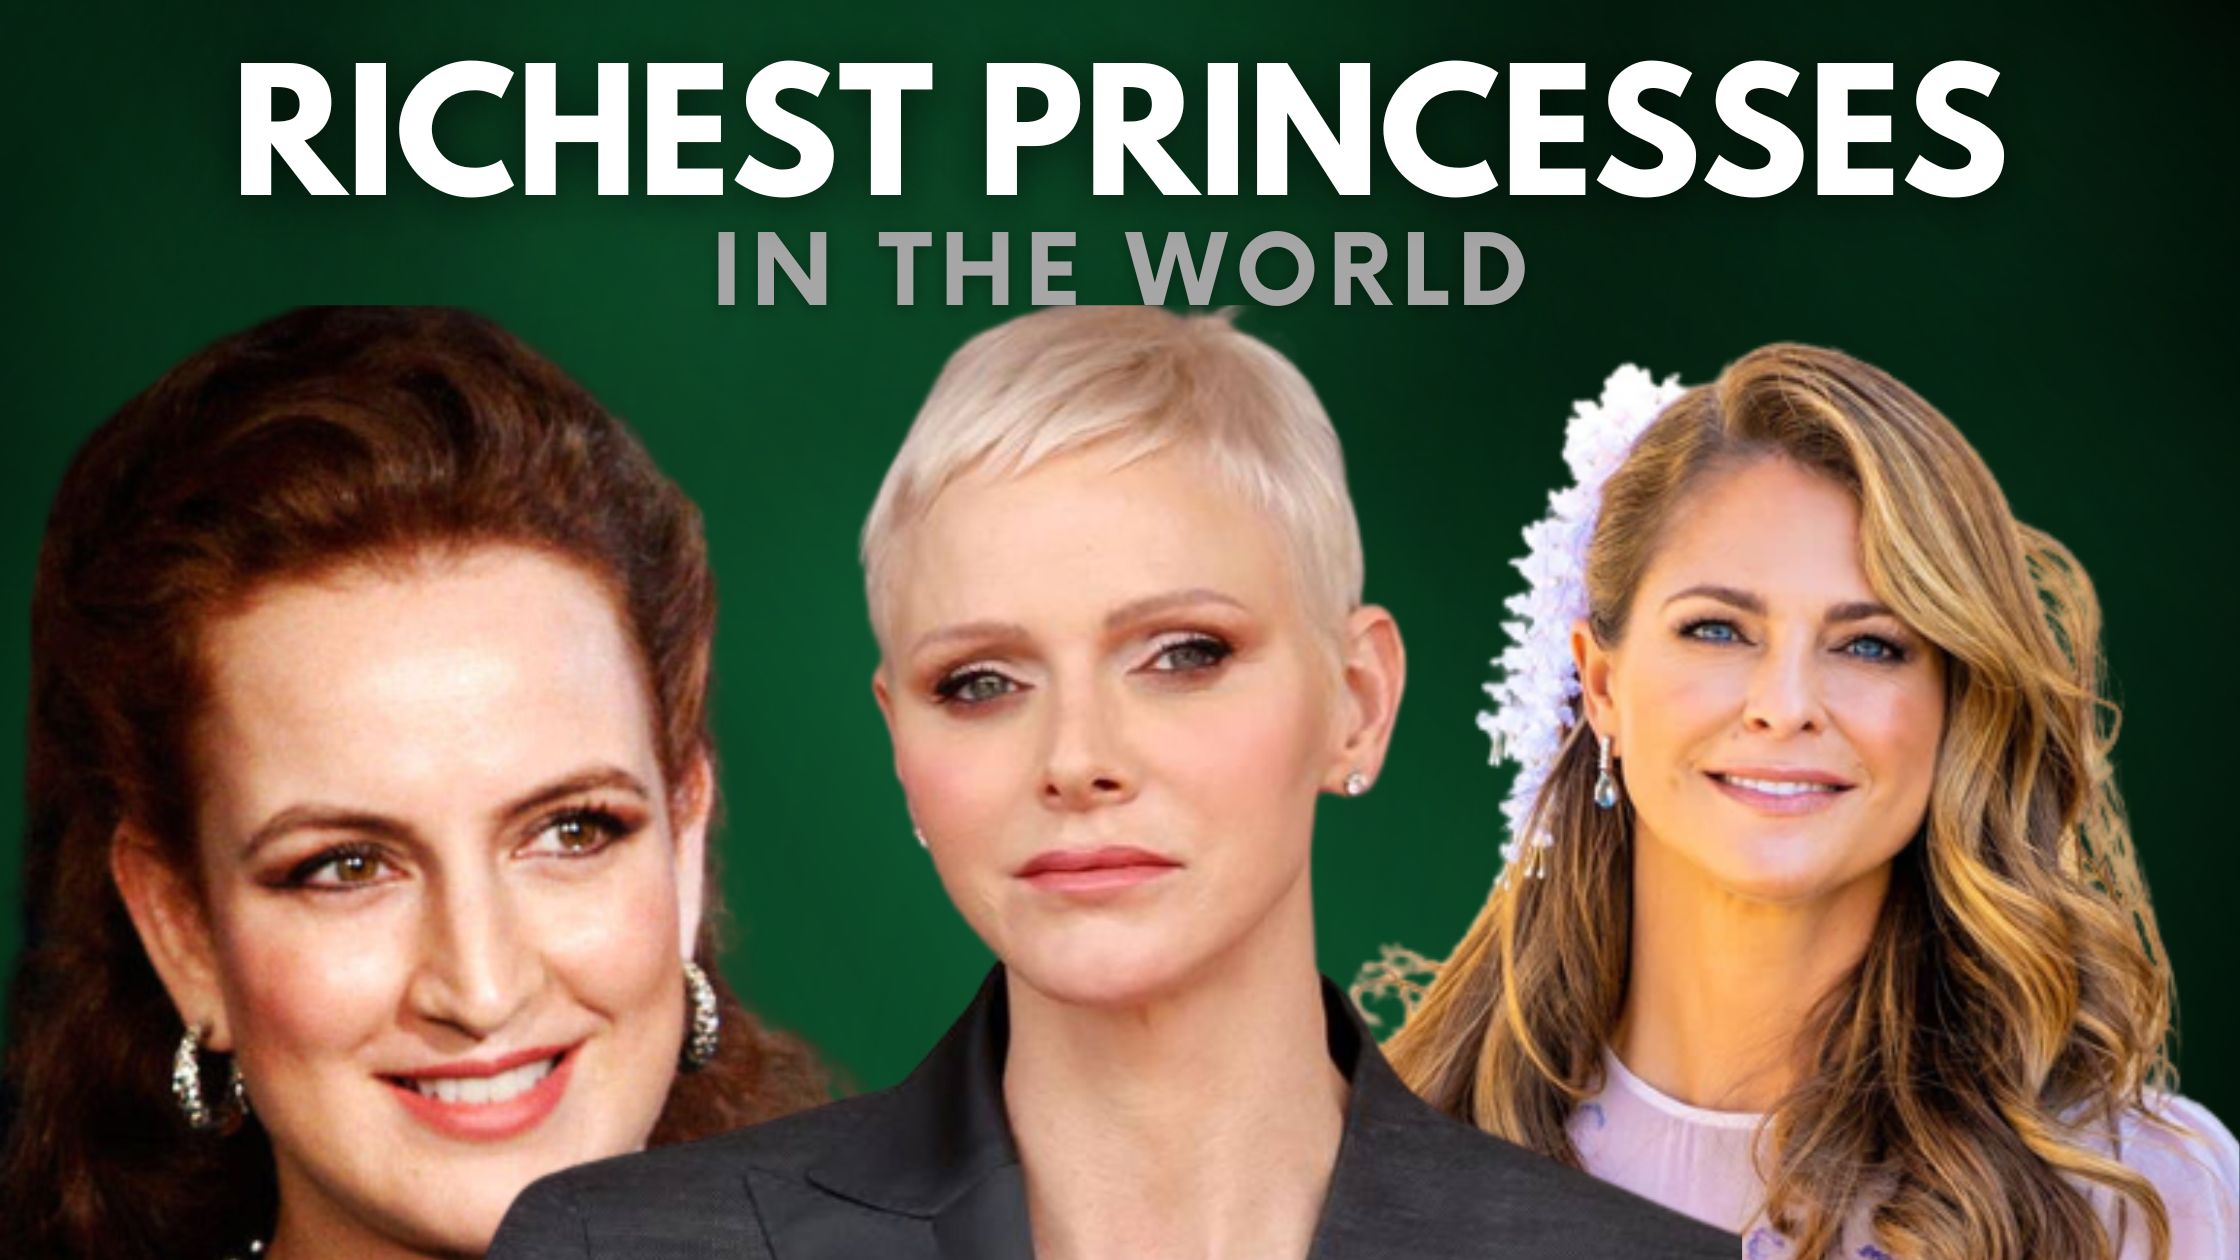 Top 10 Richest Princesses In The World